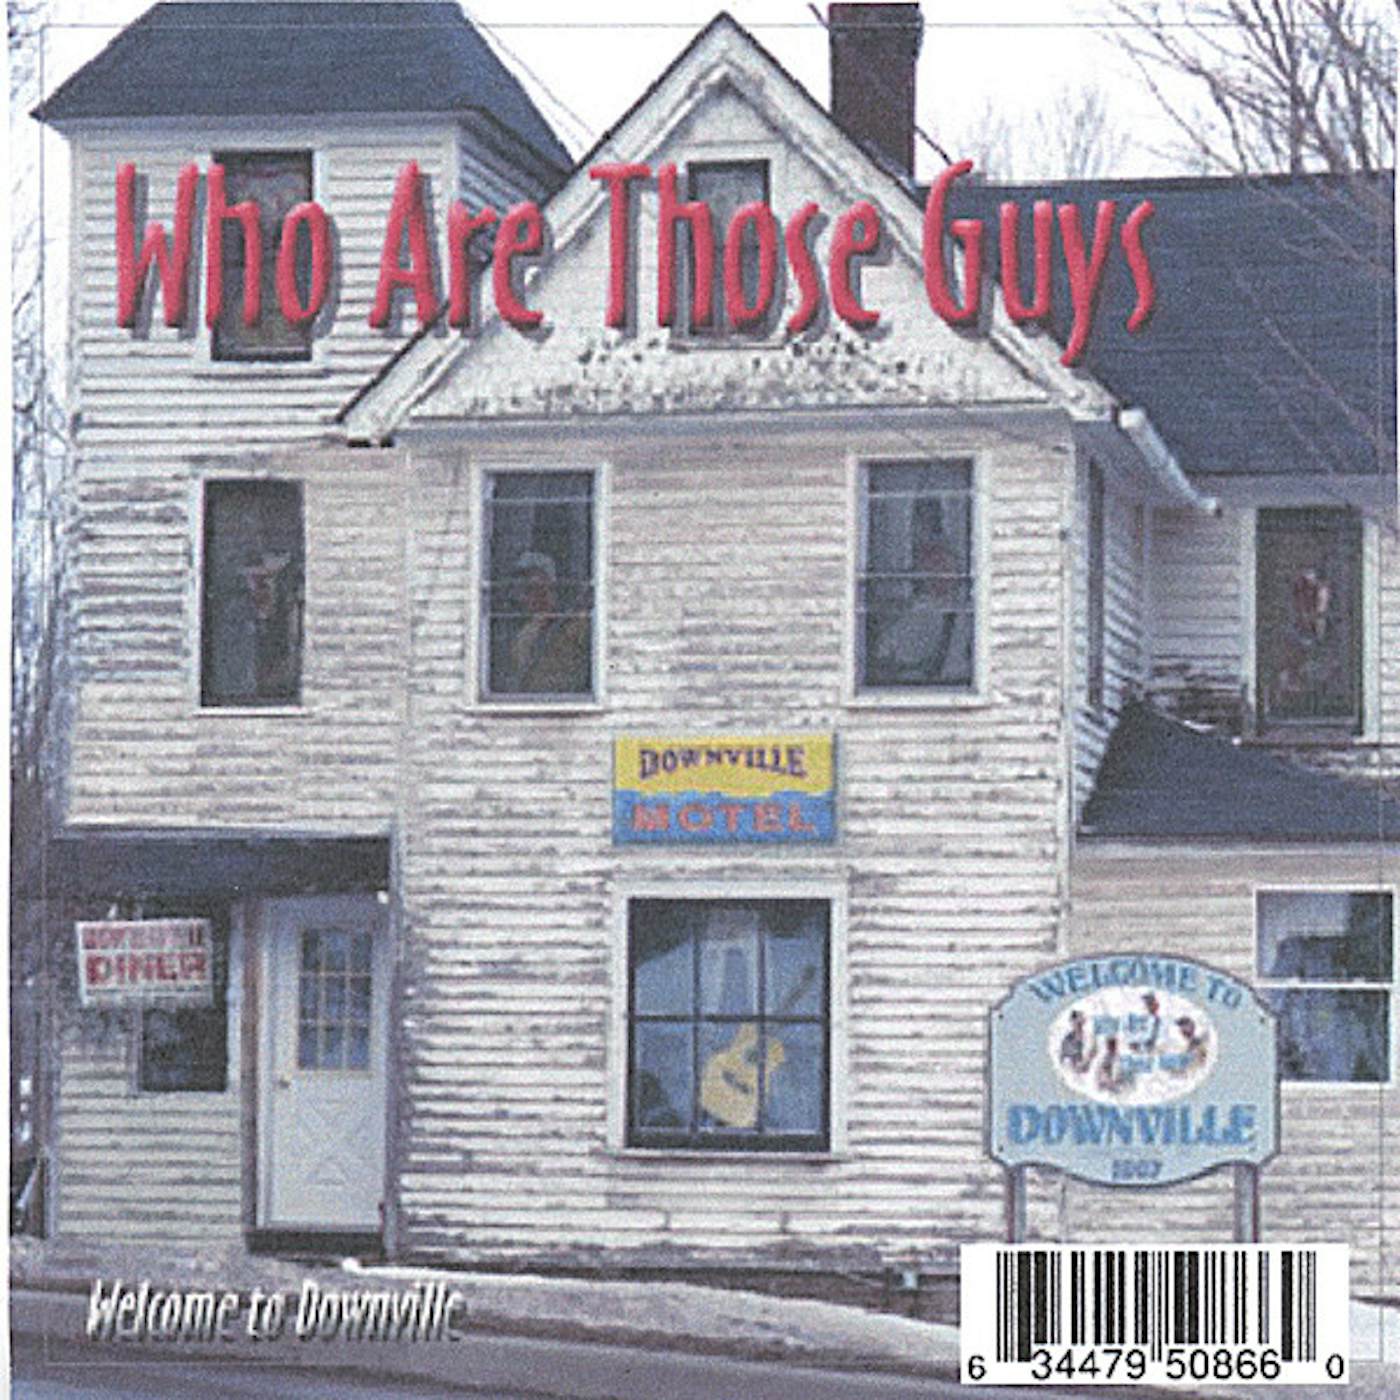 Who Are Those Guys WELCOME TO DOWNVILLE CD